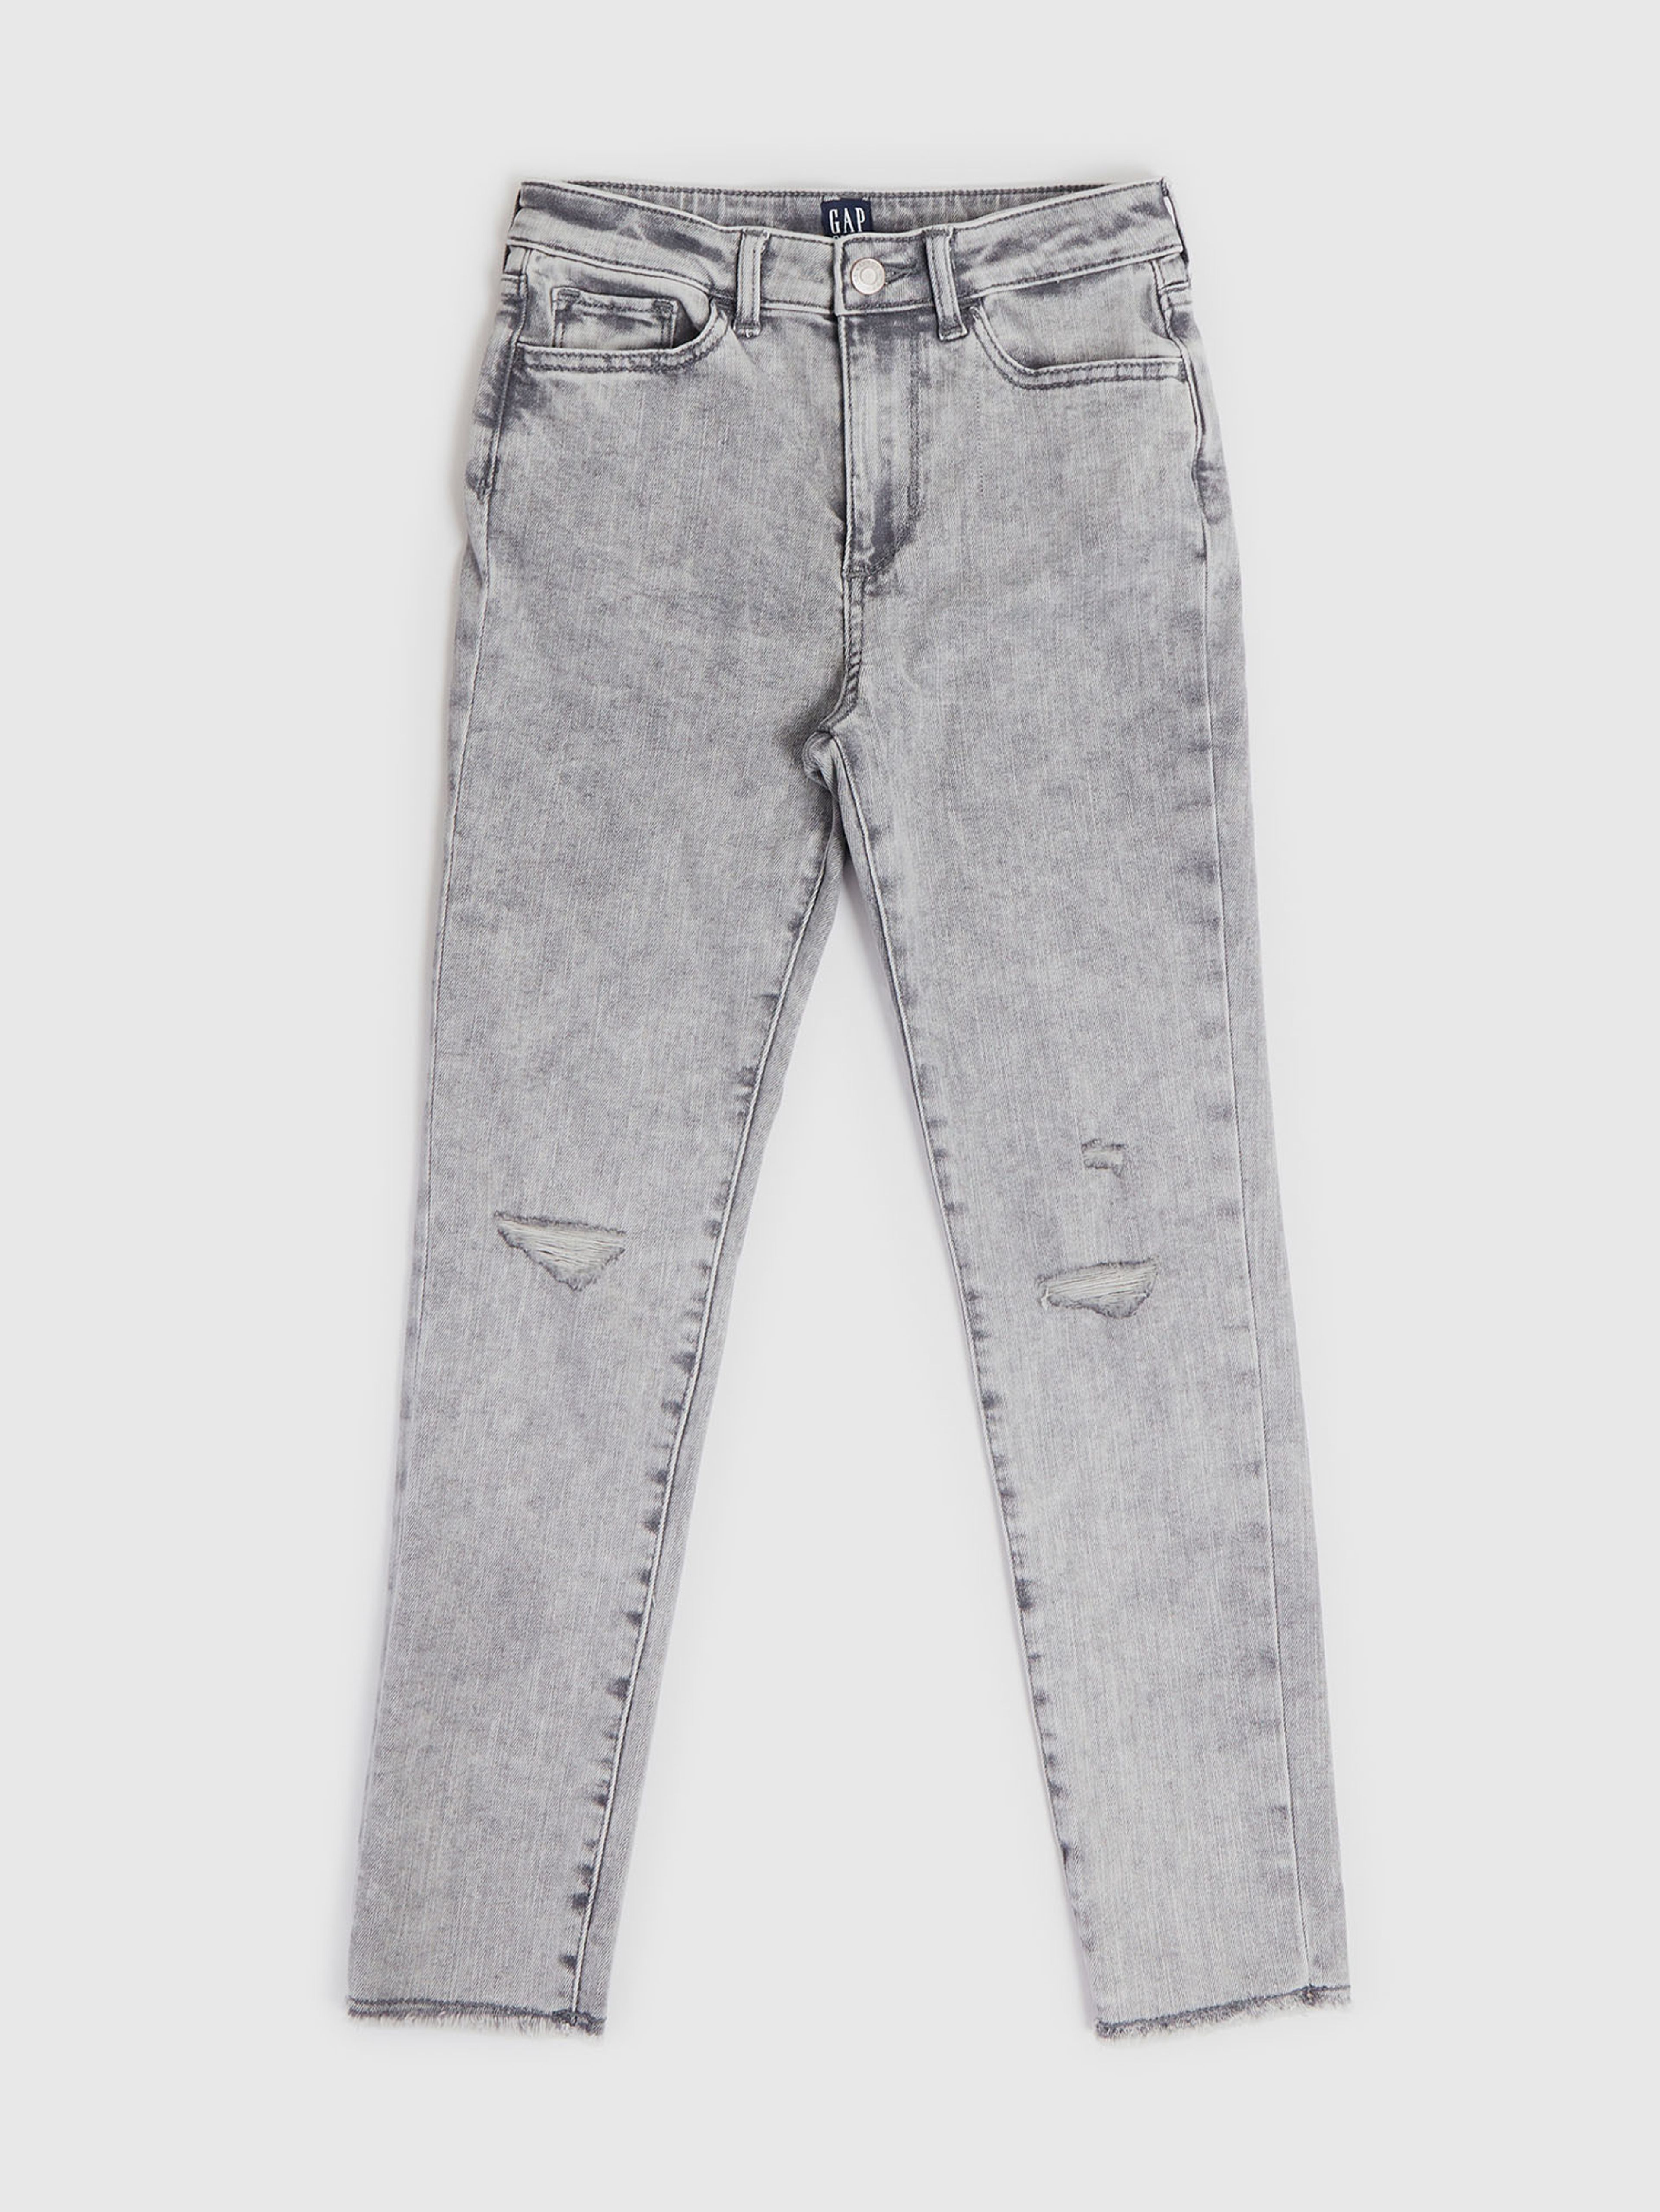 Kinder-Jeans mit hoher Taille